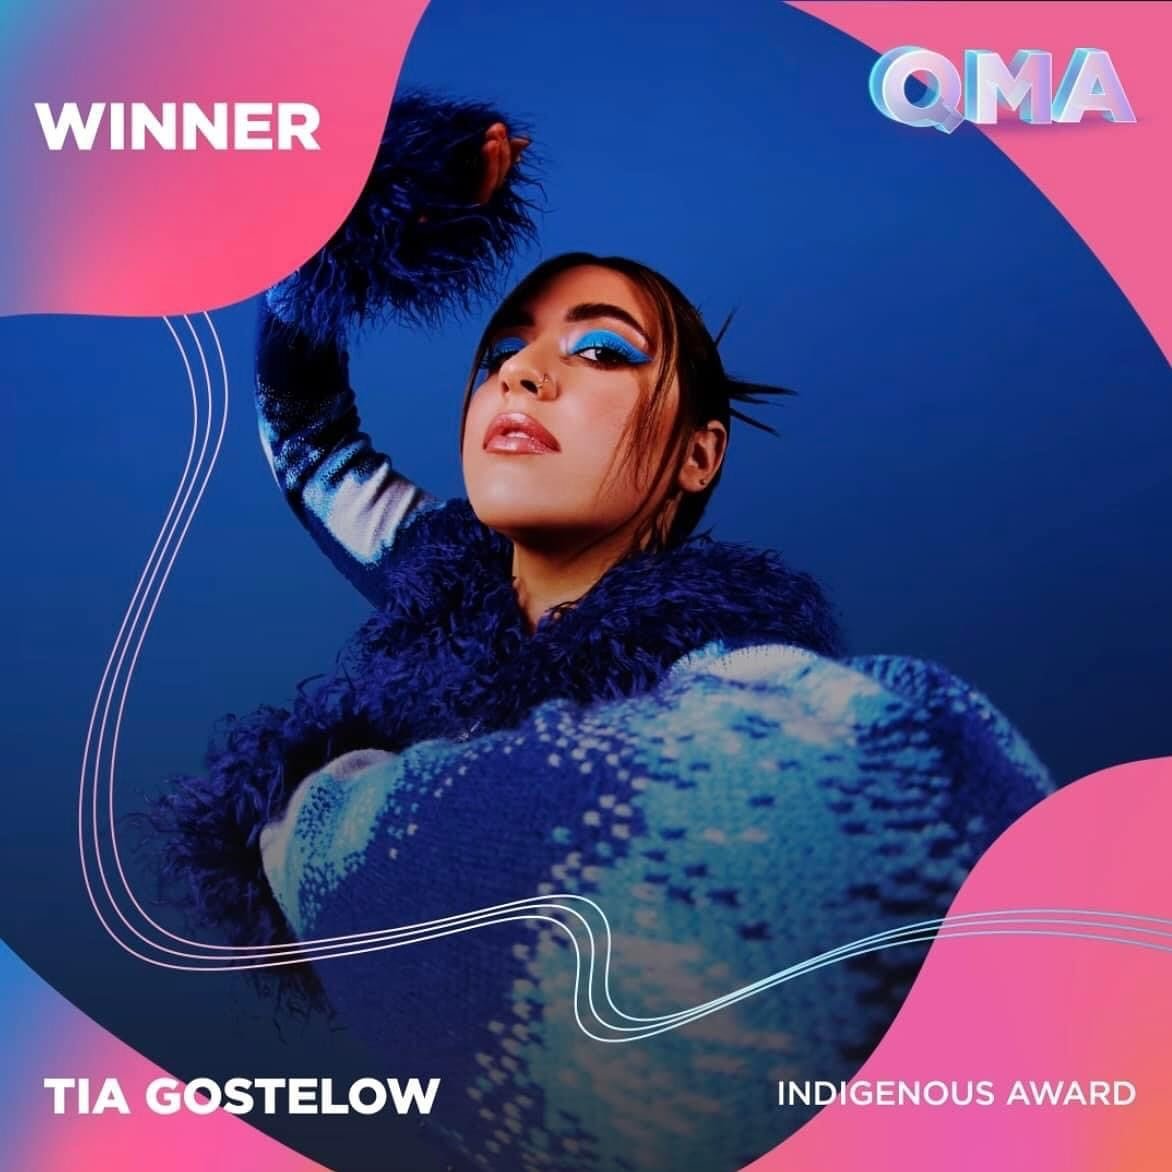 Congrats to @tiagostelow for the @qldmusicawards win last night! 🪩